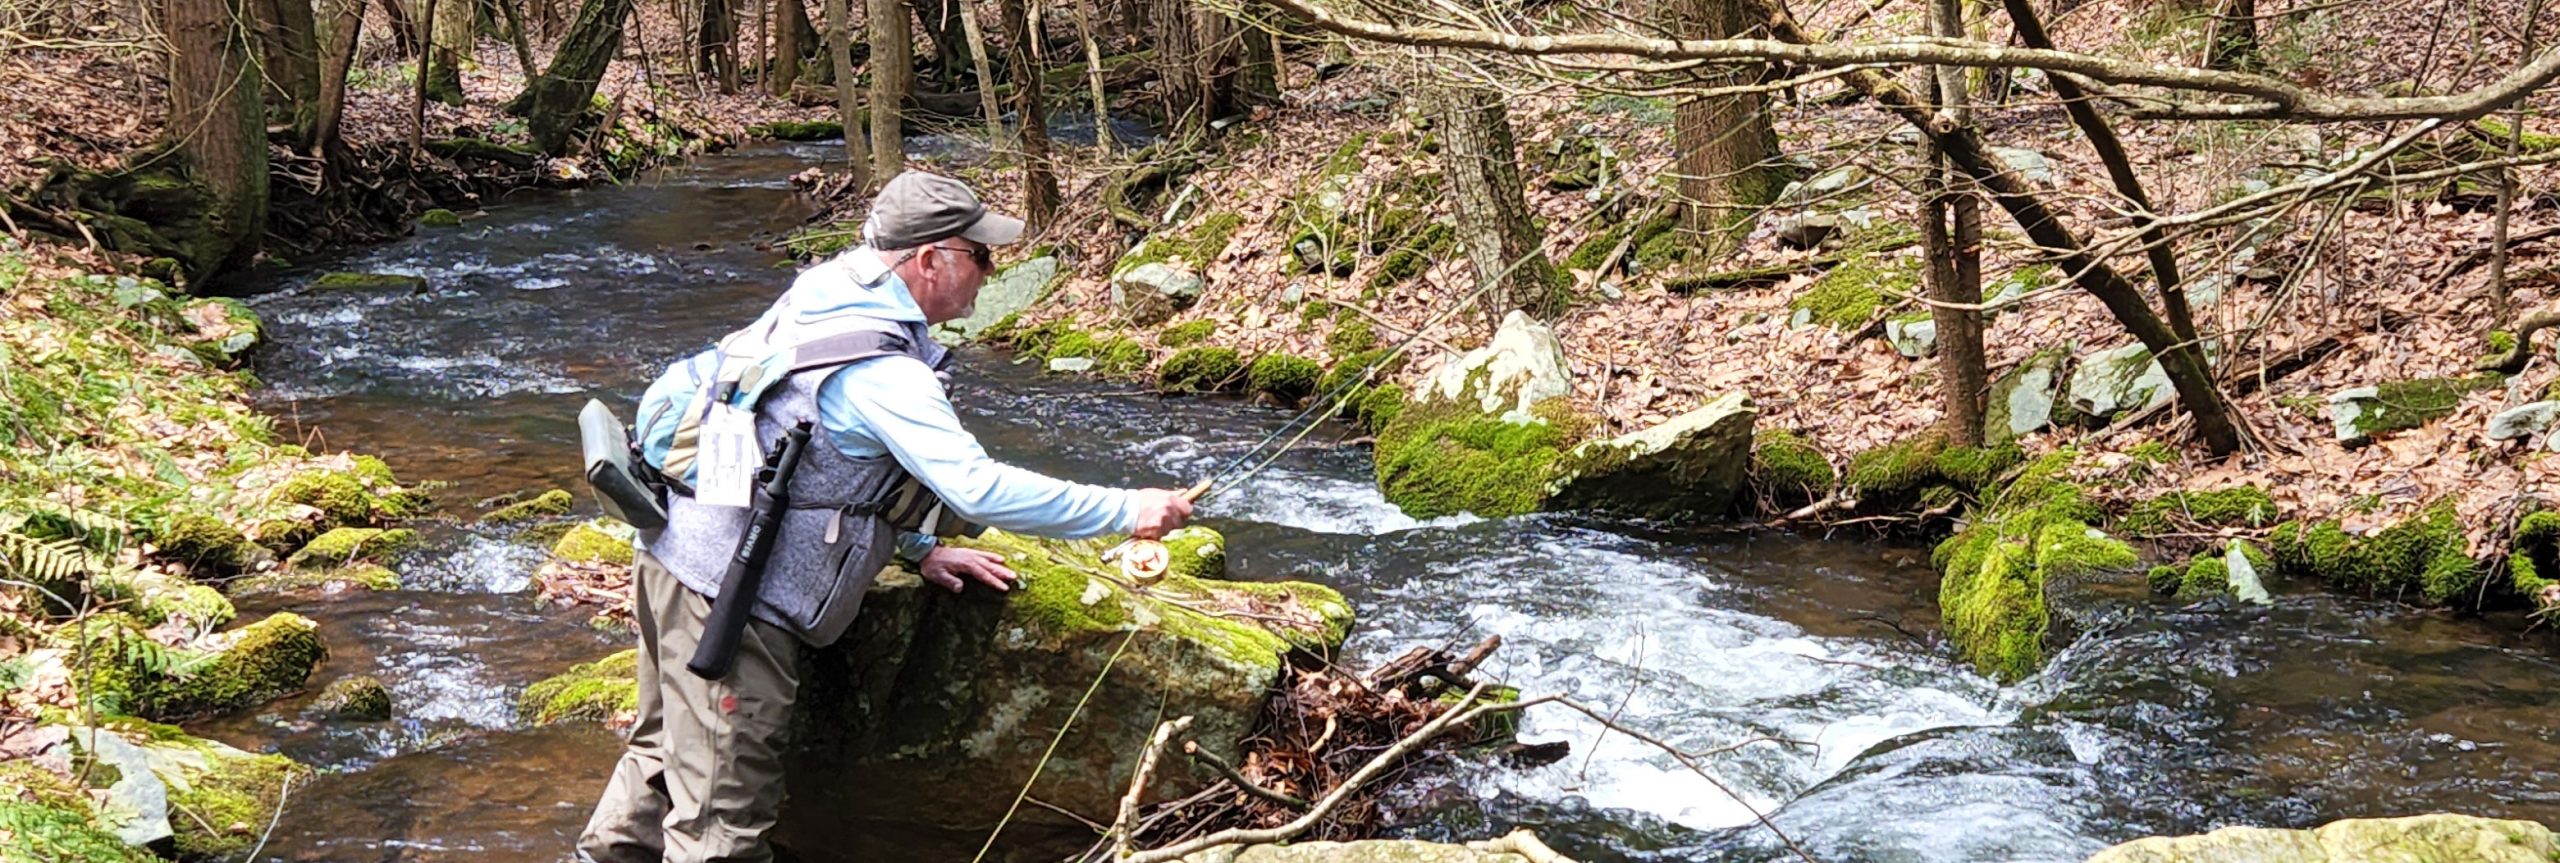 We Fish Small Streams For Brook Trout